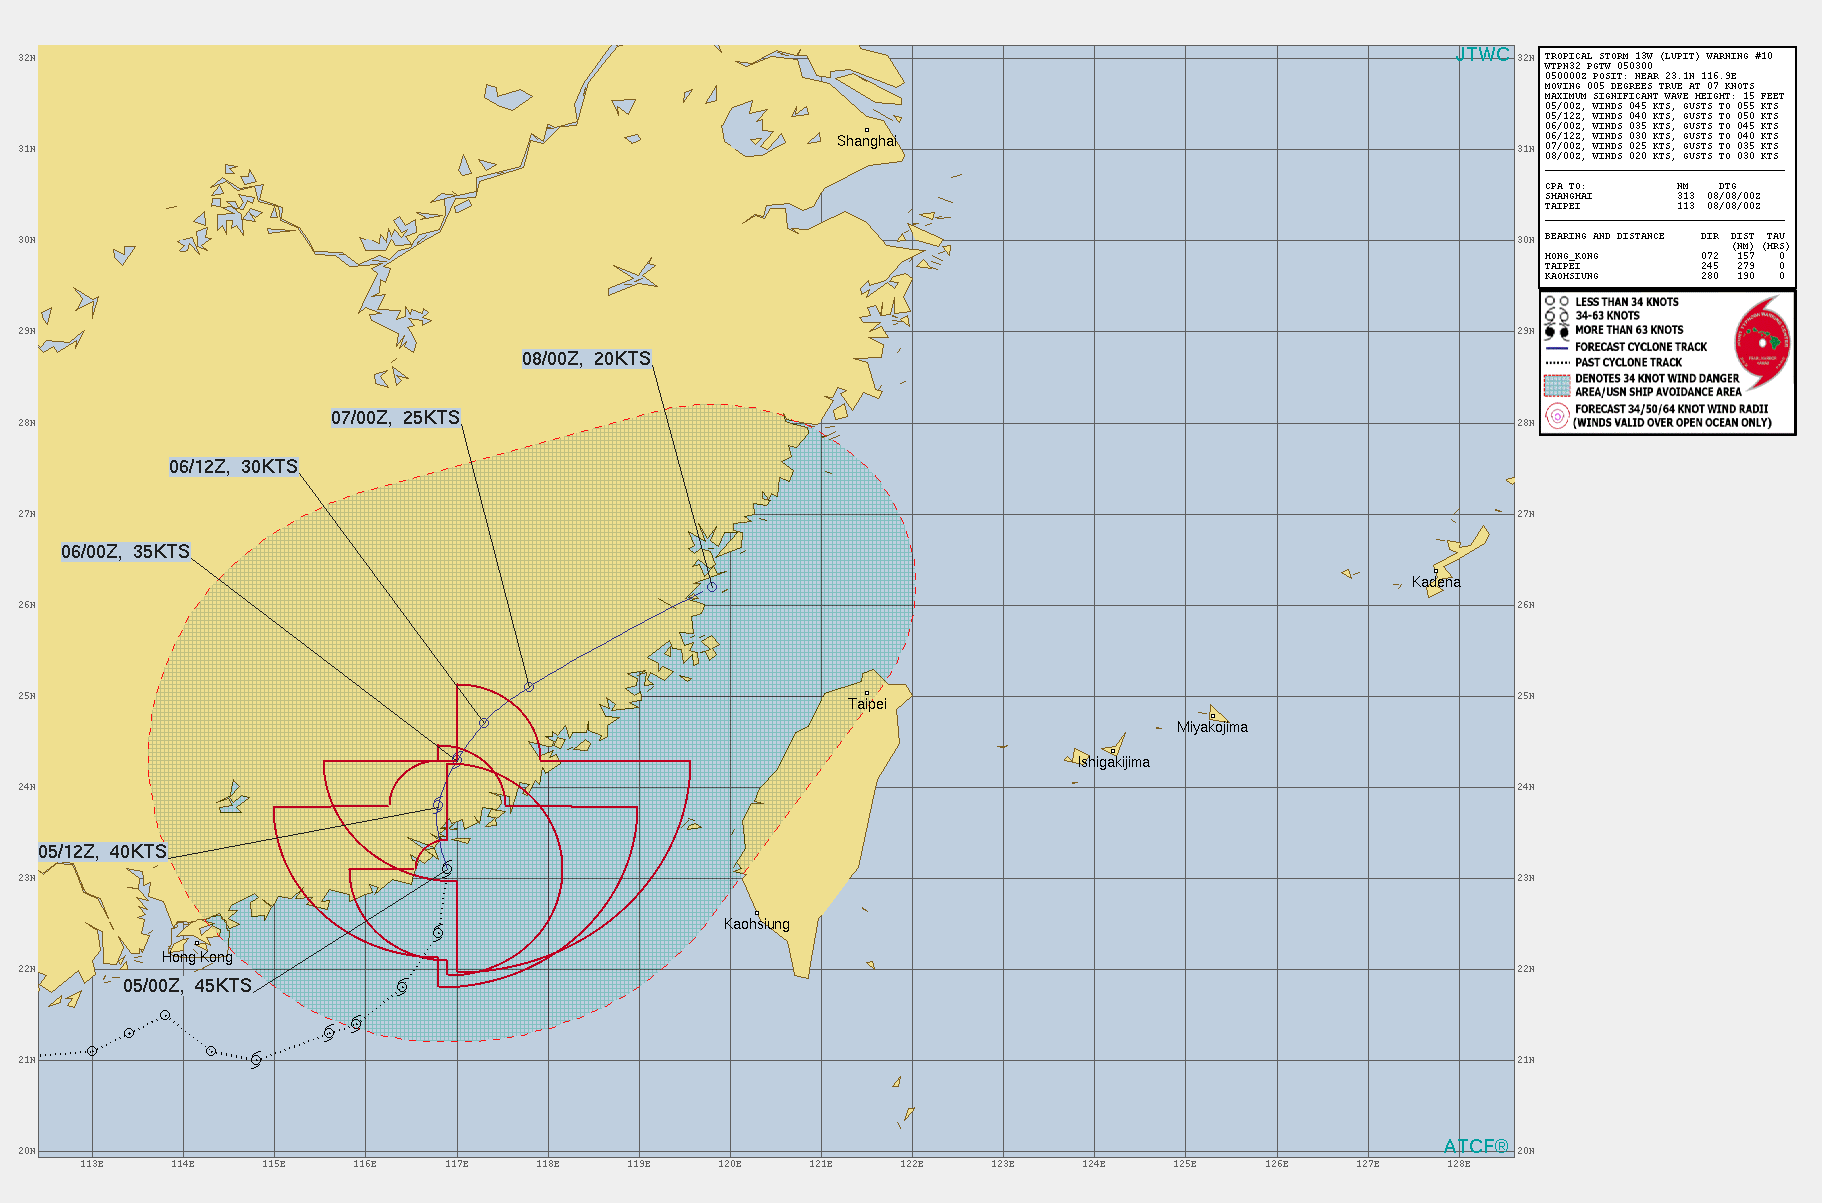 TS 13W(LUPIT). WARNING 10 ISSUED AT 05/03UTC.THERE ARE NO SIGNIFICANT CHANGES TO THE FORECAST FROM THE PREVIOUS WARNING.  FORECAST DISCUSSION: TROPICAL STORM 13W (LUPIT) IS NEARING LANDFALL IN CHINA, GETTING NUDGED NORTHWARD WITHIN THE MONSOON TROUGH AS IT GRADUALLY SHIFTS NORTHWARD. NUMERICAL MODEL GUIDANCE HAS HIGHER THAN NORMAL SPREAD IN THE SHORT-TERM TRACK, WITH GFS-BASED GUIDANCE TAKING LUPIT MORE NORTHWESTWARD AND DEEPER INLAND, WHILE THE ECMWF AND OTHER GUIDANCE TURNS NORTHEASTWARD AND STAYS CLOSER TO THE COAST. THE LATTER SCENARIO SEEMS MORE REASONABLE, GIVEN THAT NORTHERLY SHEAR IS EXPECTED TO CONTINUE DURING THE NEXT 48 HOURS, BIASING CONVECTION TOWARD THE SOUTHERN SIDE OF THE CIRCULATION AND TUGGING THE CENTER TOWARD THE COASTLINE. THE JTWC TRACK FORECAST KEEPS LUPIT OVER CHINA FOR ABOUT 60 HOURS, WHICH IS EXPECTED TO RESULT IN DISSIPATION BY 72 HOURS. HOWEVER, IT IS WORTH NOTING THAT SOME MODEL GUIDANCE, SUCH AS ECMWF, THE ECMWF ENSEMBLE, AND COAMPS-TC EXPECT THE VORTEX TO SURVIVE AND RESTRENGTHEN AFTER MOVING BACK OFFSHORE OVER THE EAST CHINA SEA. THIS SCENARIO COULD BE REALISTIC IF THE REMNANT VORTEX REFORMS OVER WATER WITHIN THE NEARBY MONSOON TROUGH, WHICH IS PROVIDING BACKGROUND VORTICITY. WHILE THE CURRENT FORECAST CONTINUES TO PREDICT DISSIPATION OVER LAND, THE POTENTIAL FOR REVIVAL OVER WATER WILL BE CLOSELY MONITORED.